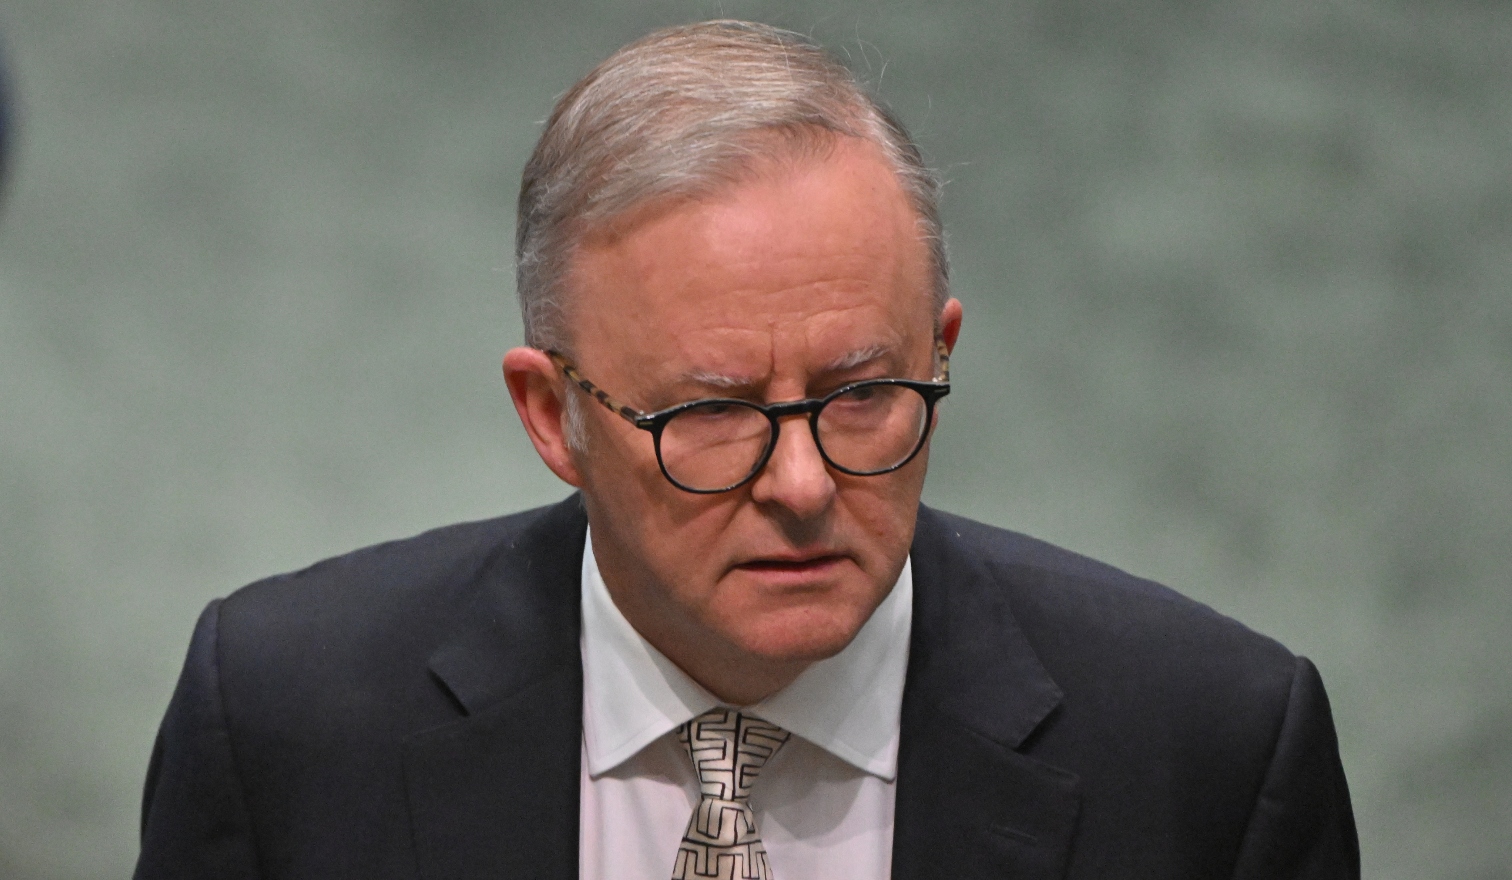 Australian Prime Minister accused of ‘selling out’ over promise to protect LGBT students